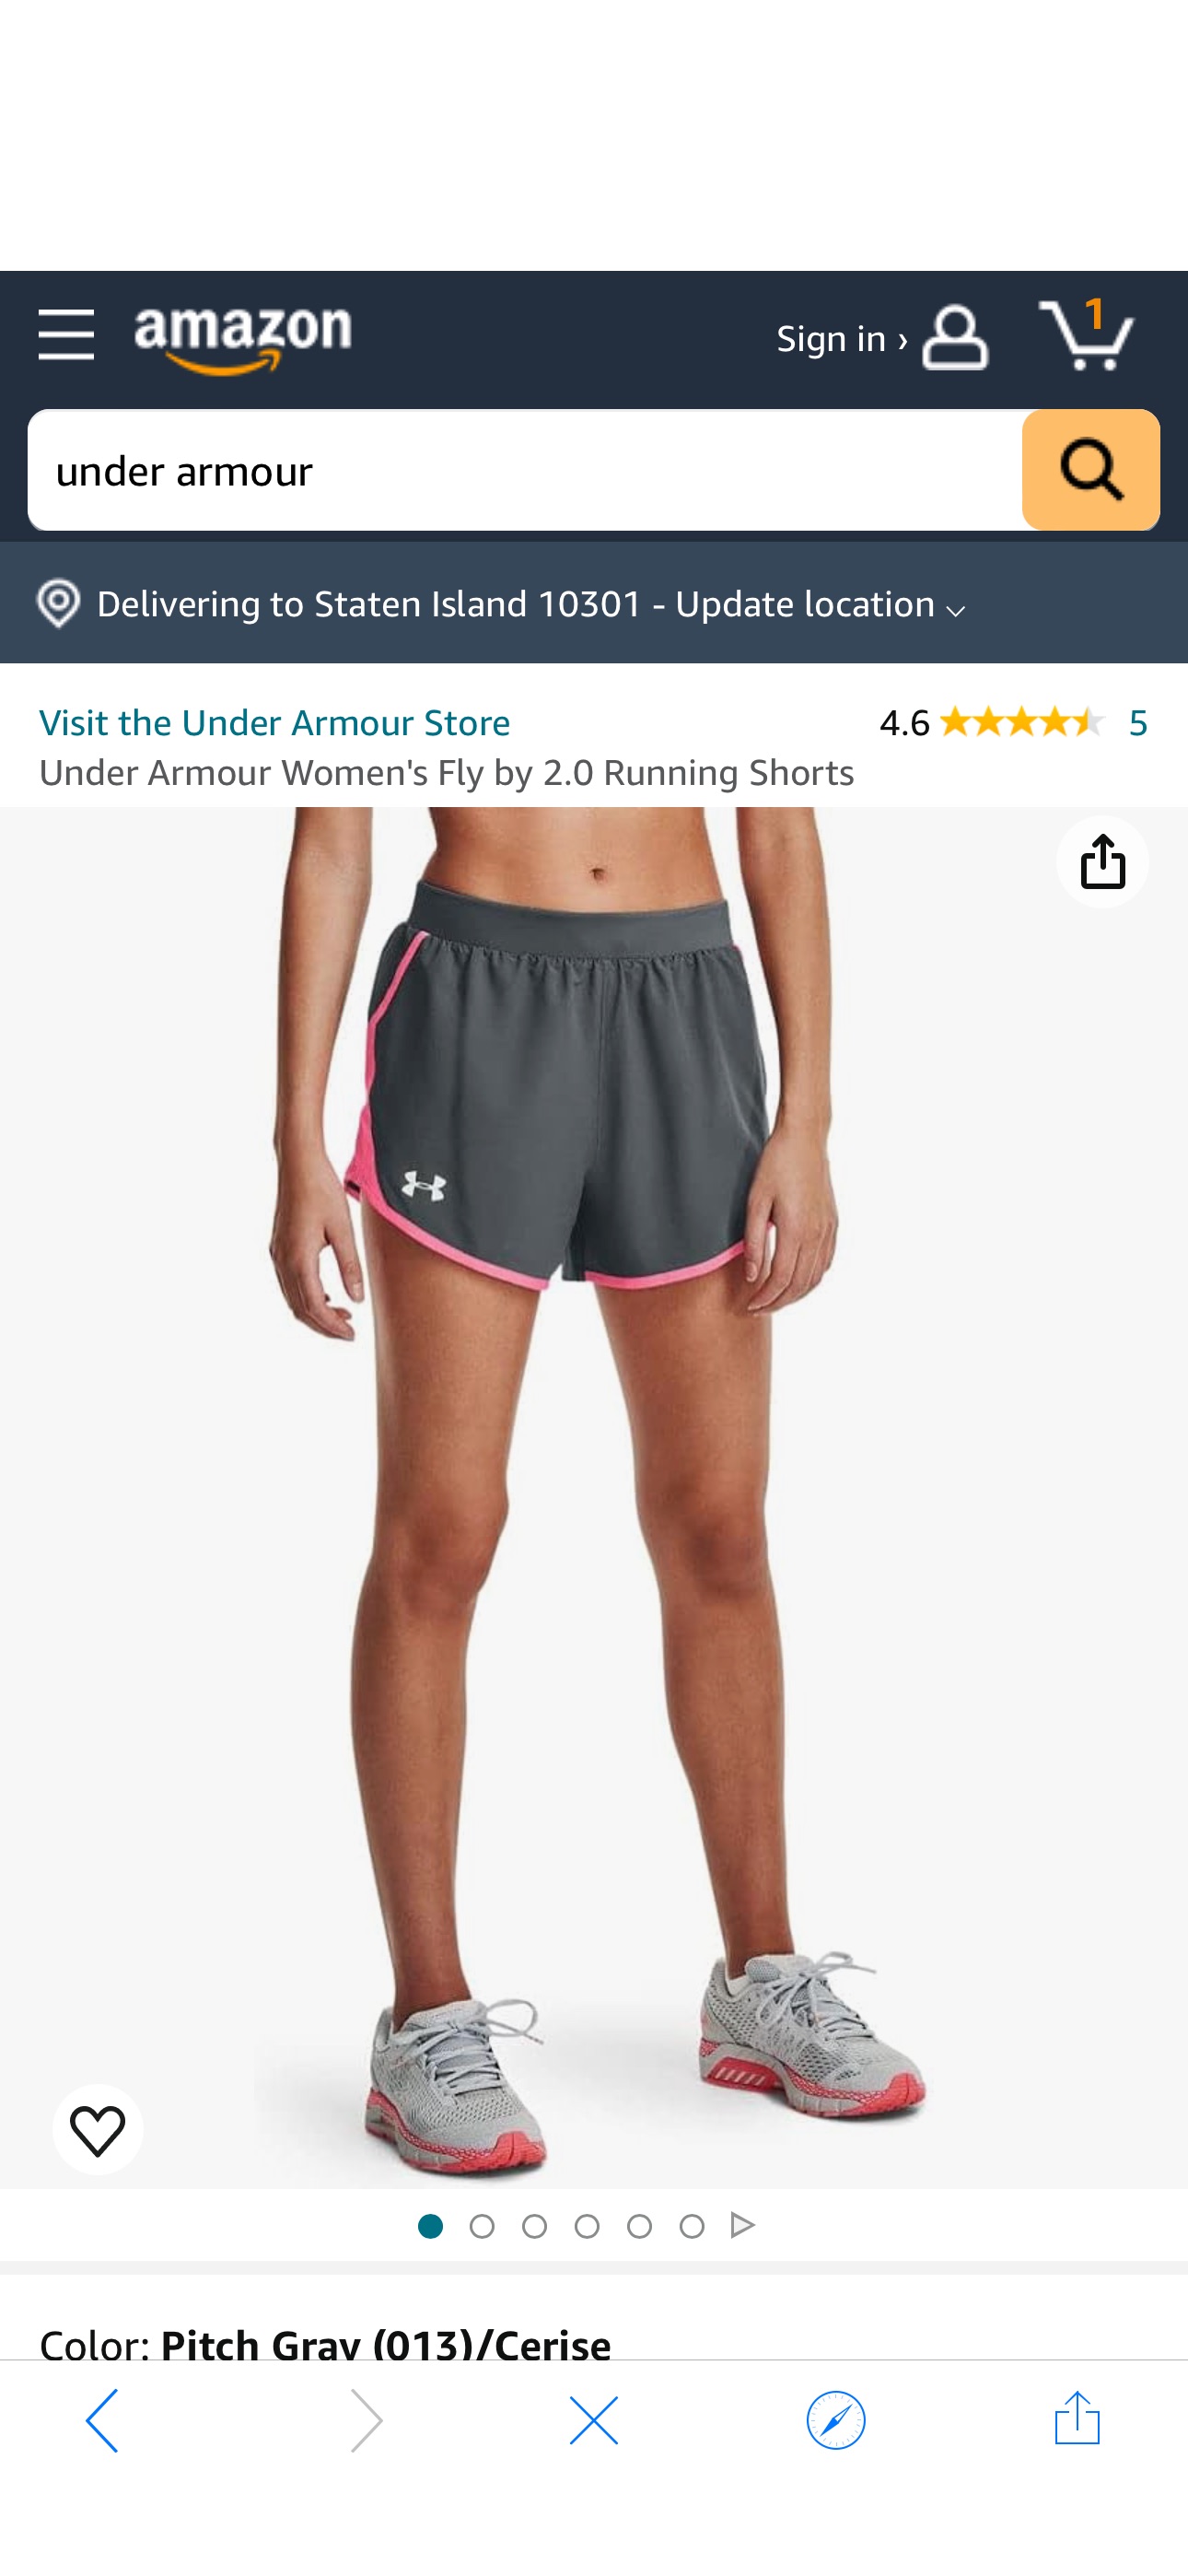 Amazon.com: Under Armour Women's Fly by 2.0 Running Shorts, Pitch Gray (013)/Cerise, 3X-Large : Clothing, Shoes & Jewelry